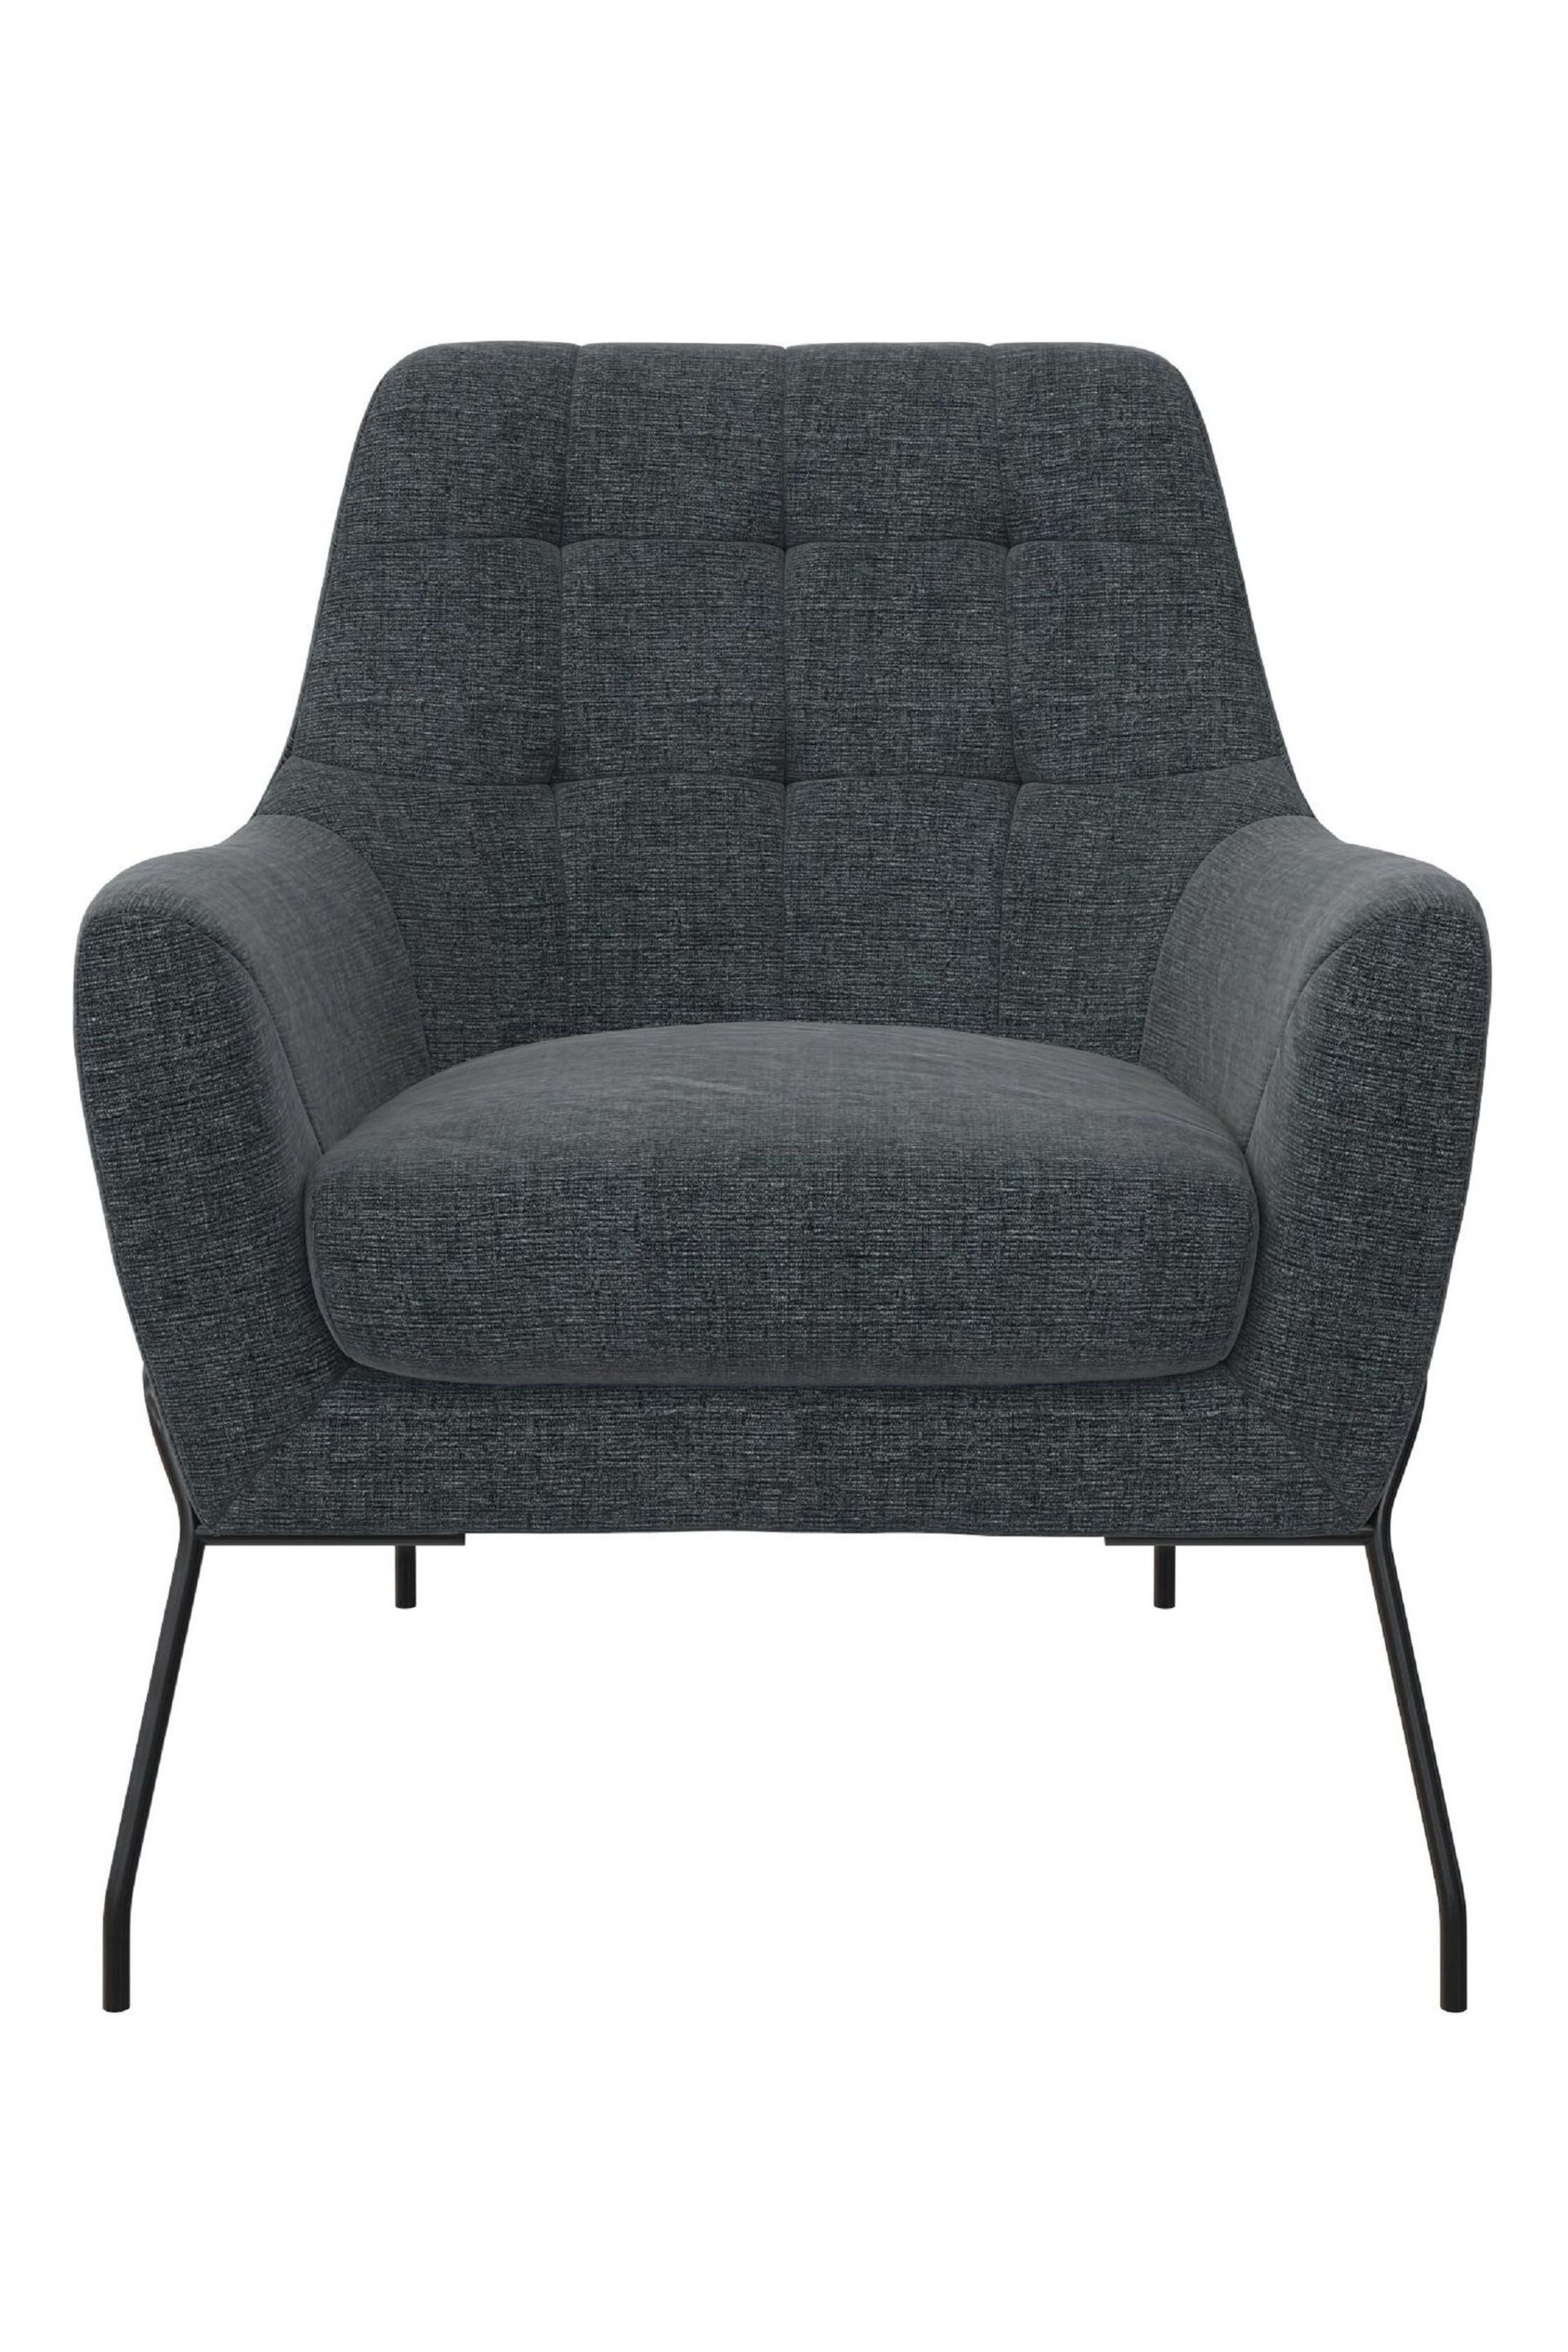 Dorel Home Grey Europe Brayden Accent Upholstered Chair - Image 2 of 4